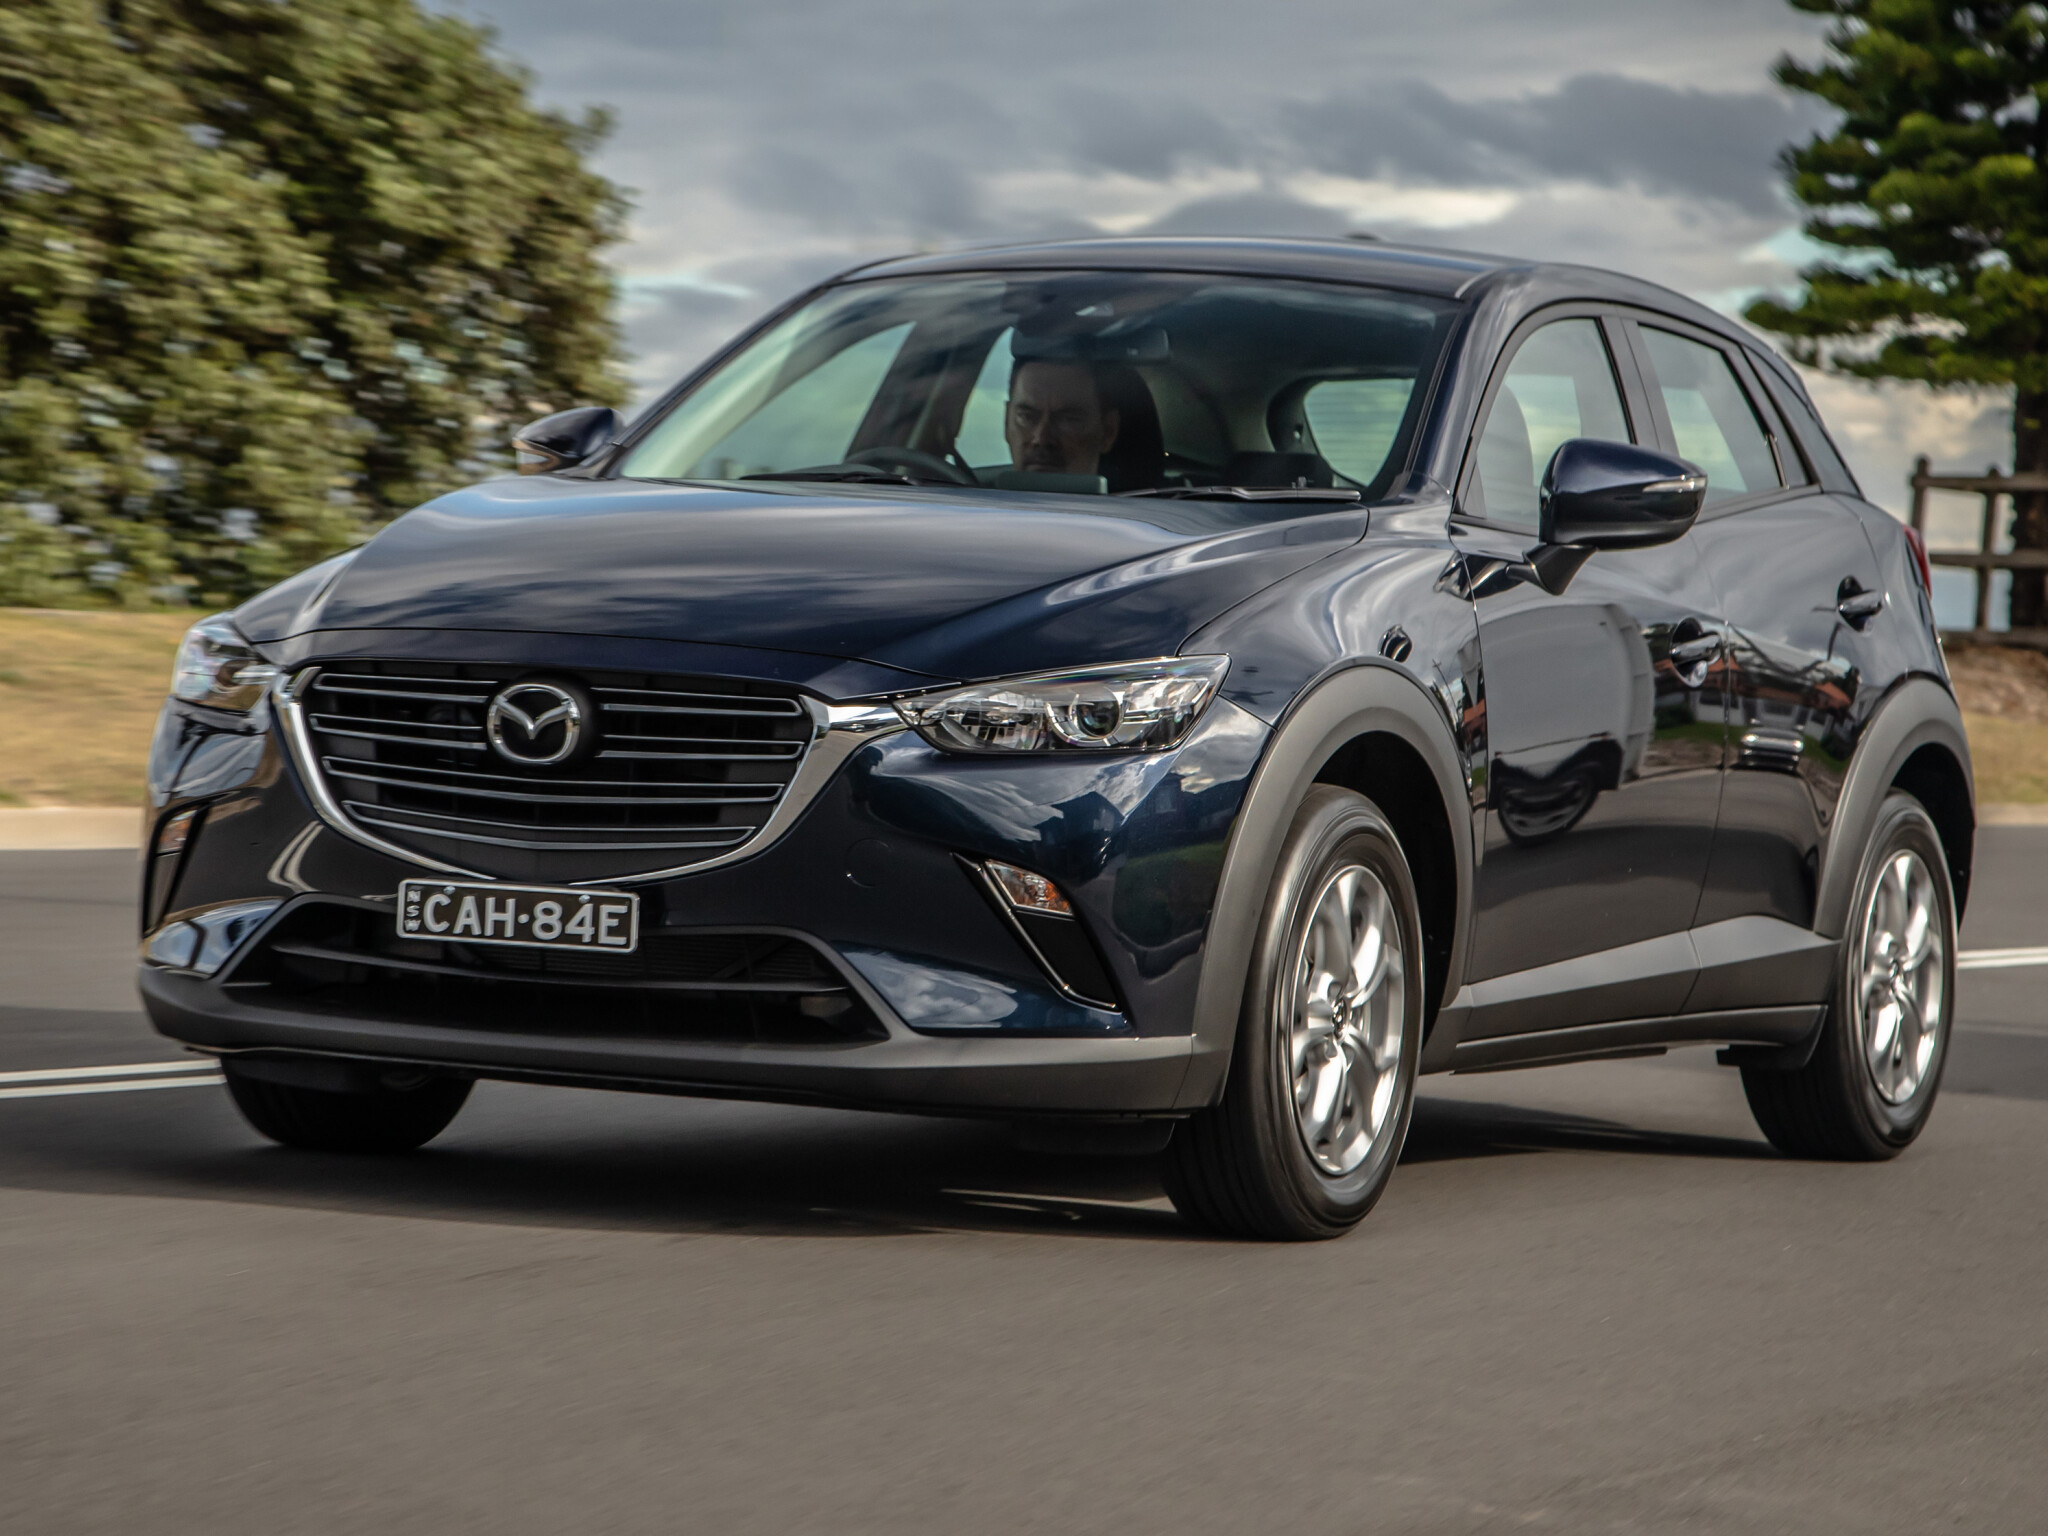 2021 Mazda CX-3 review – Mazda's best looking SUV?